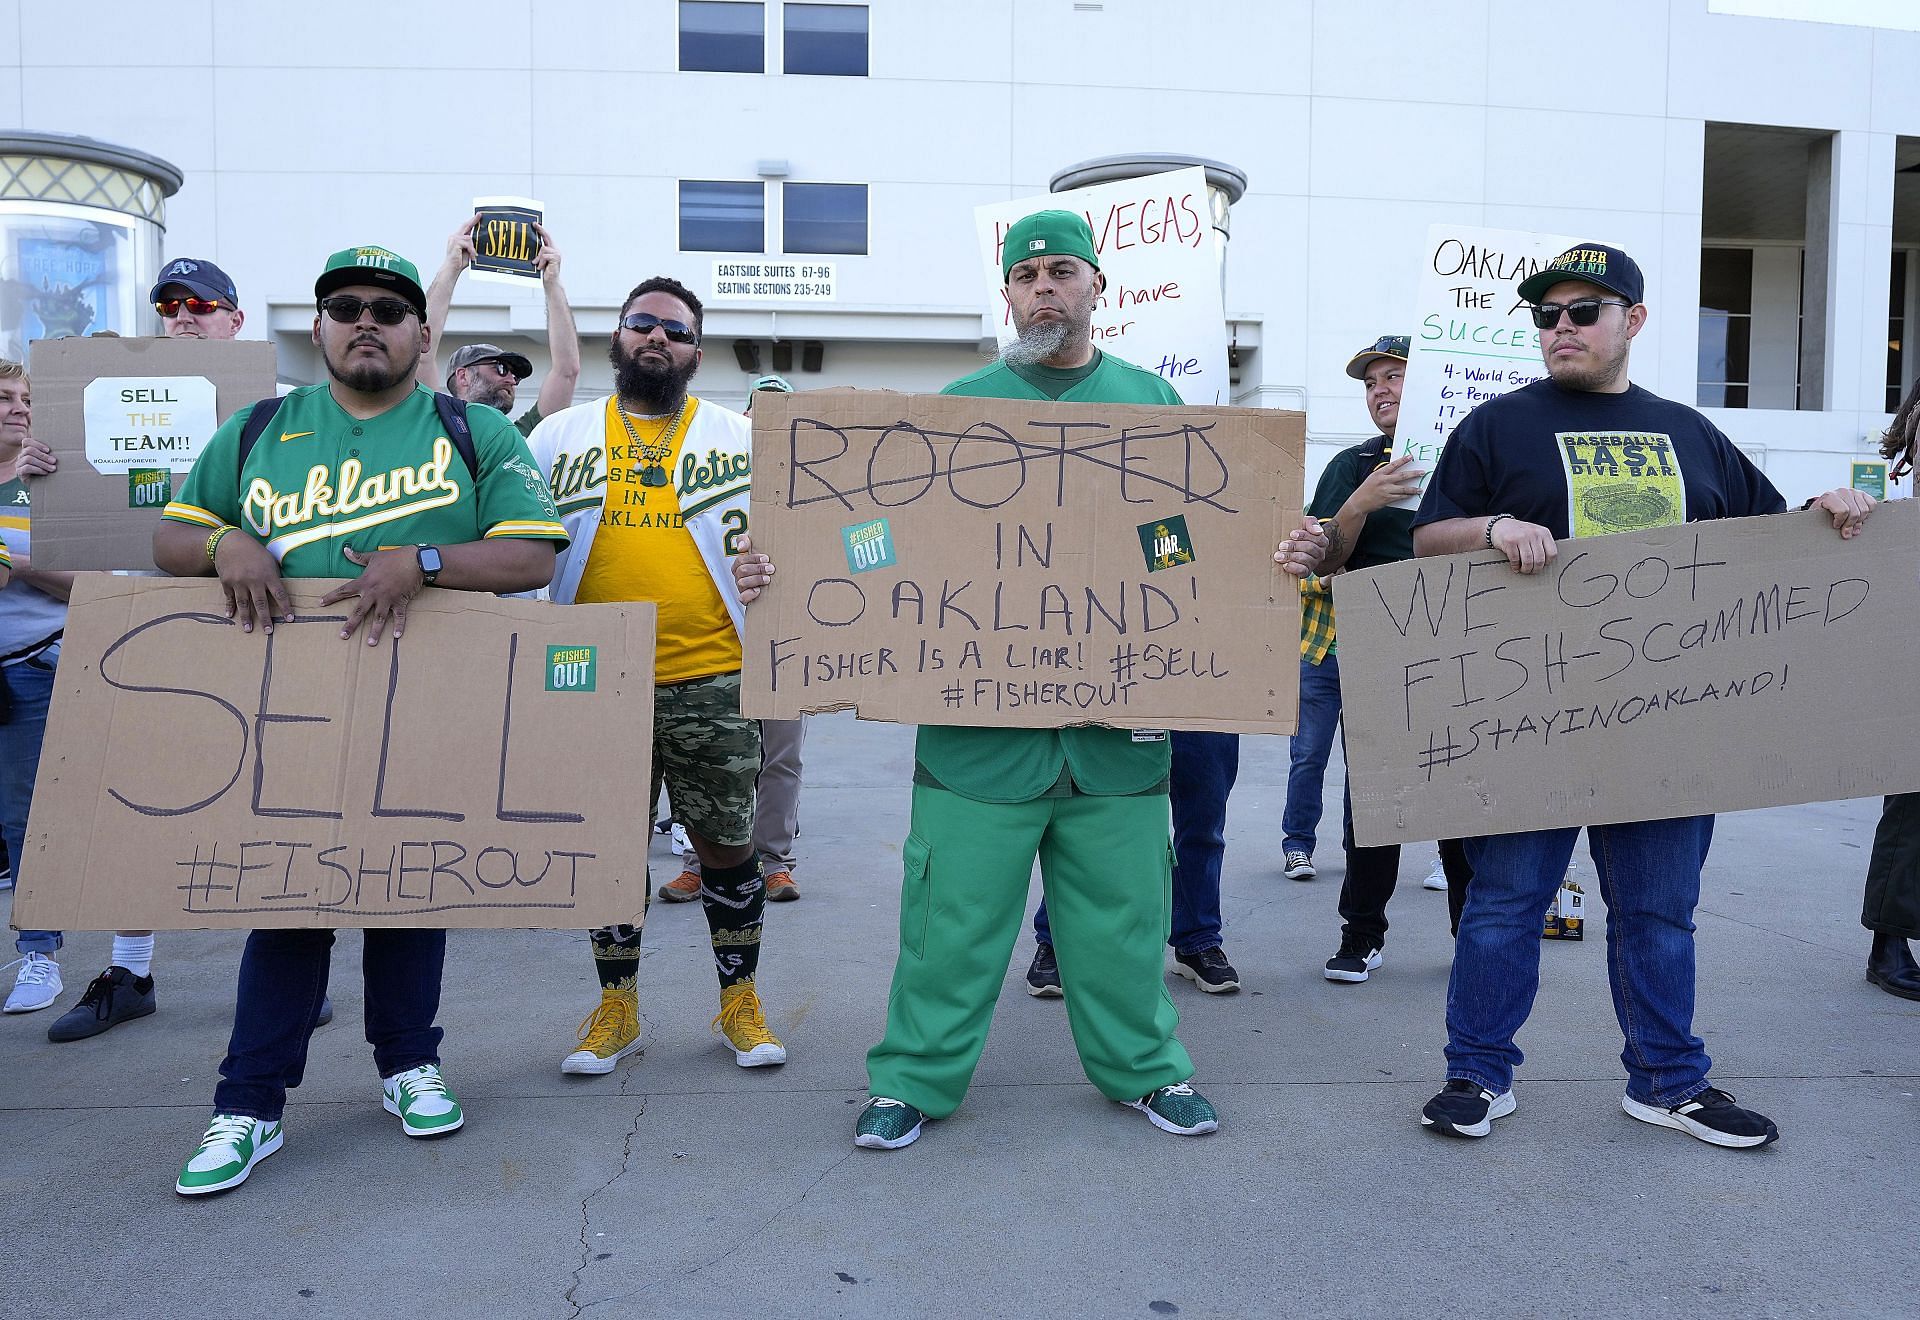 Baseball fans sympathize with aggrieved Oakland Athletics supporter's  speech against team moving to Las Vegas: This dude is literally my hero